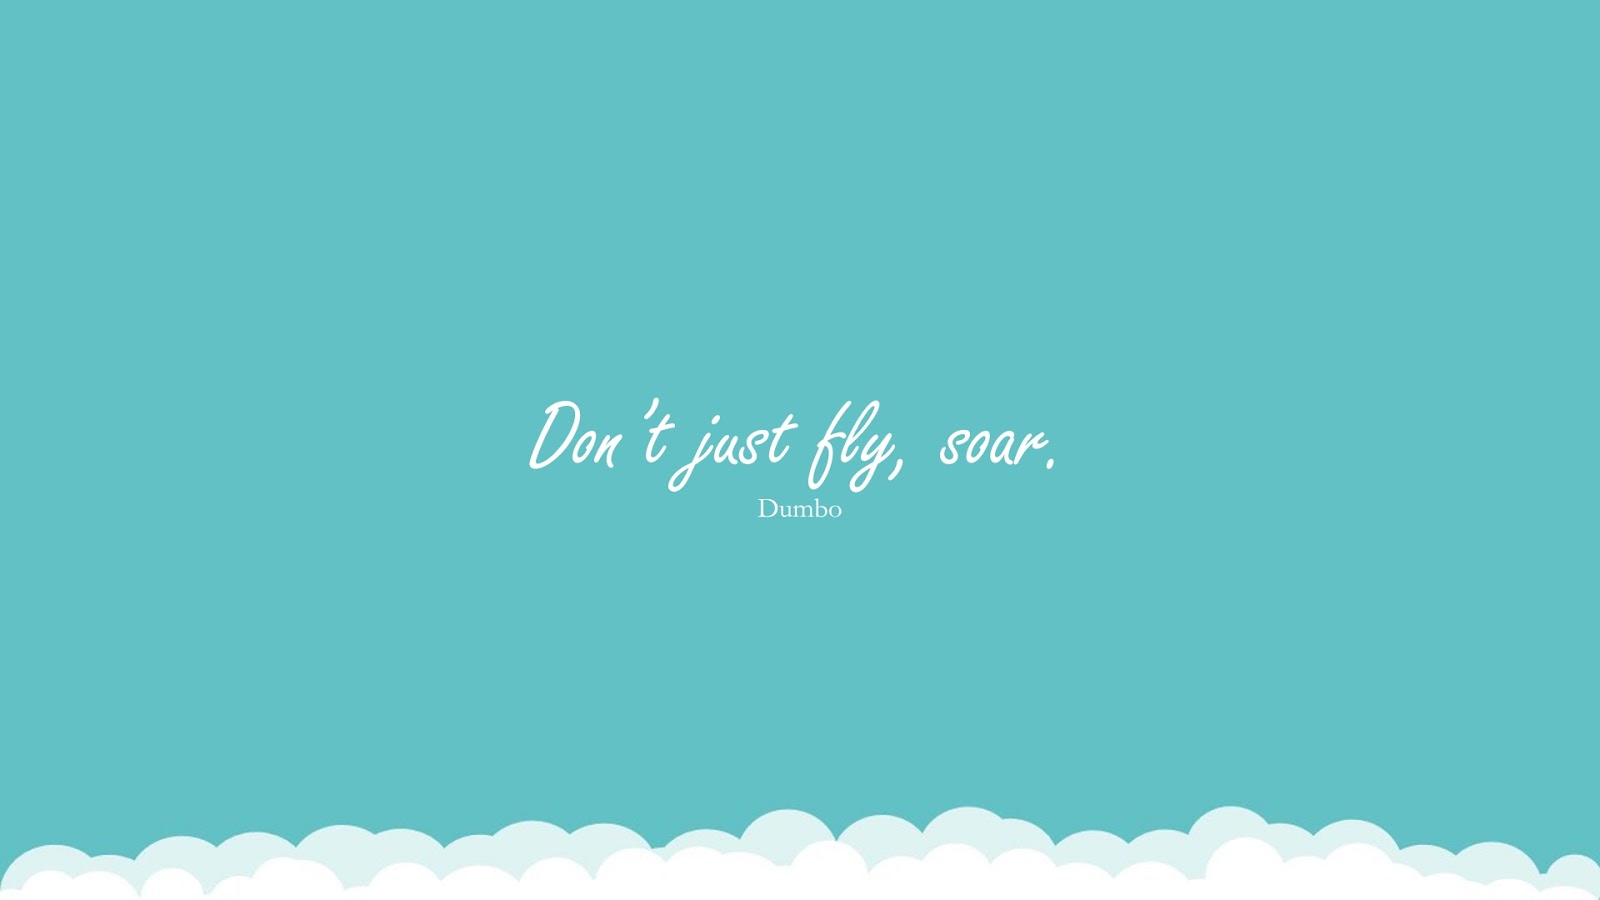 Don’t just fly, soar. (Dumbo);  #SelfEsteemQuotes